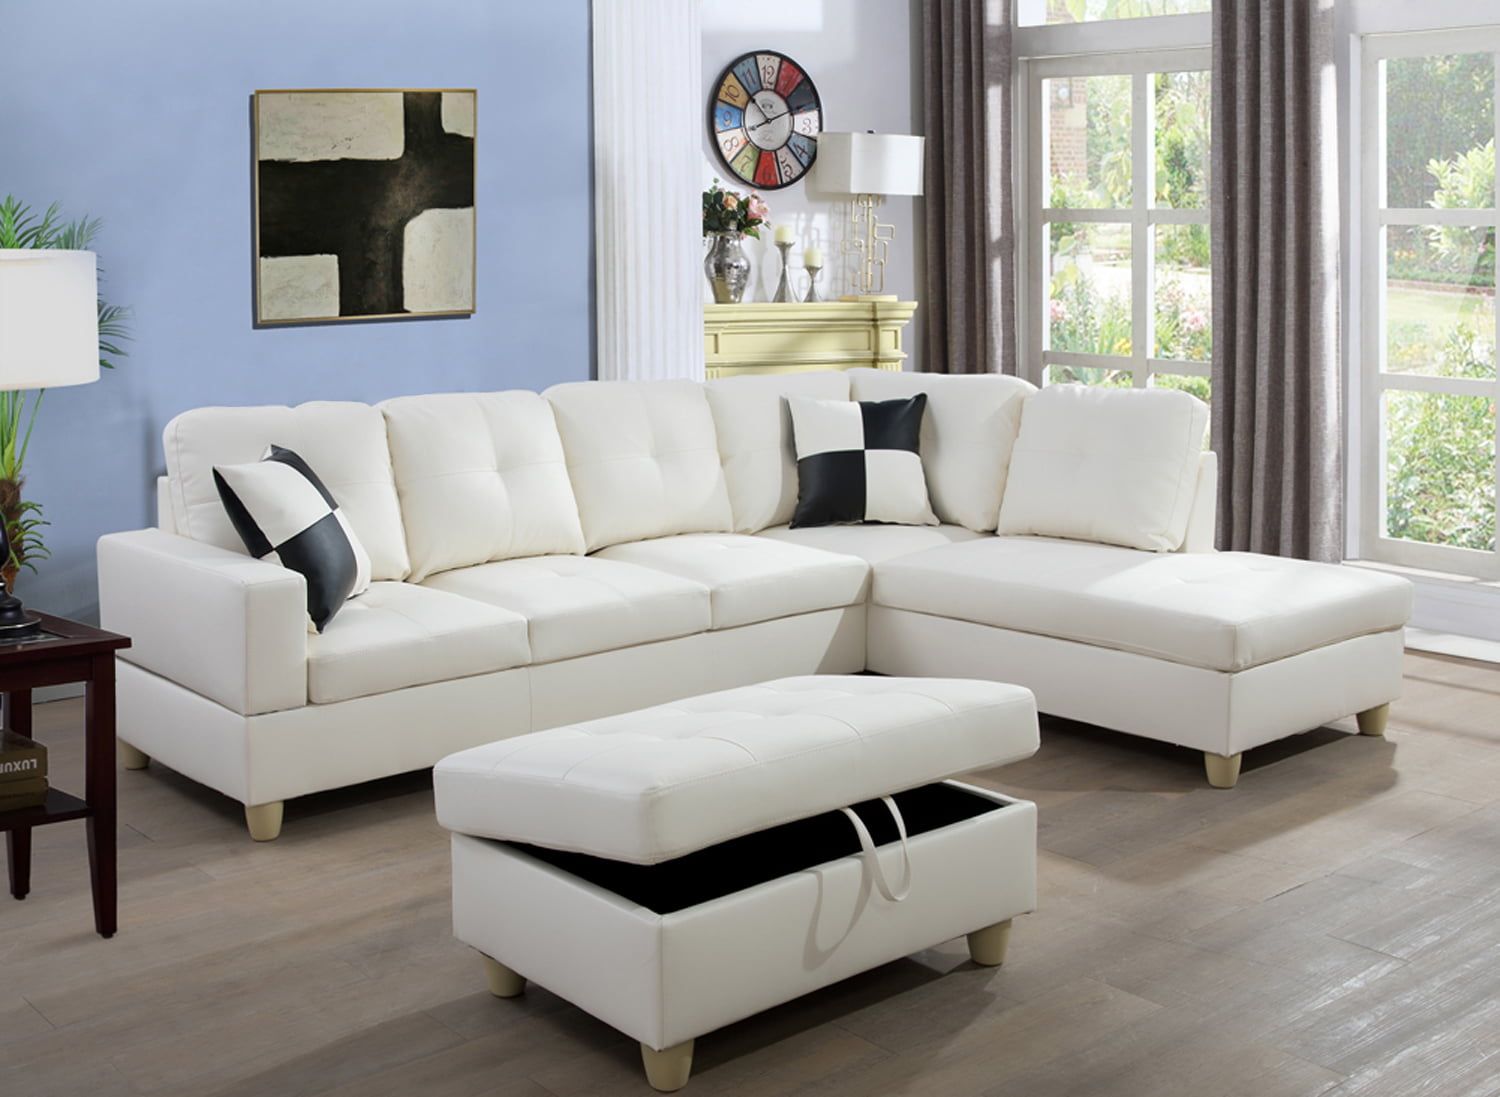 Ainehome Faux Leather Sectional Set, Living Room L Shaped Modern Sofa With Regard To Faux Leather Sectional Sofa Sets (View 5 of 21)